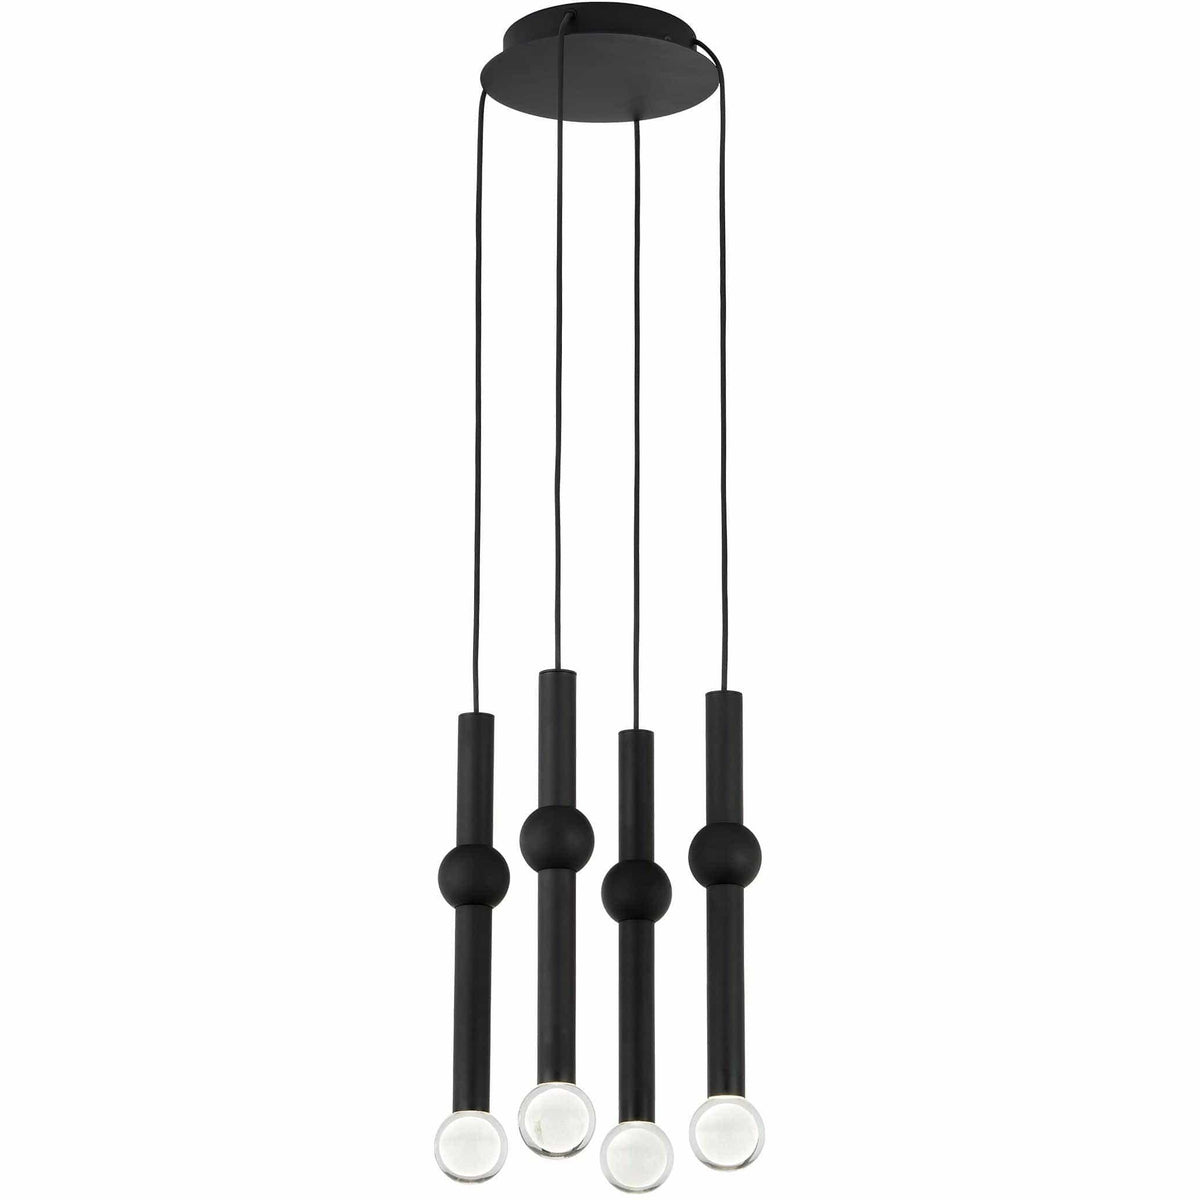 Visual Comfort Modern Collection - Guyed LED Chandelier - 700TRSPGYD4RB-LED930 | Montreal Lighting & Hardware